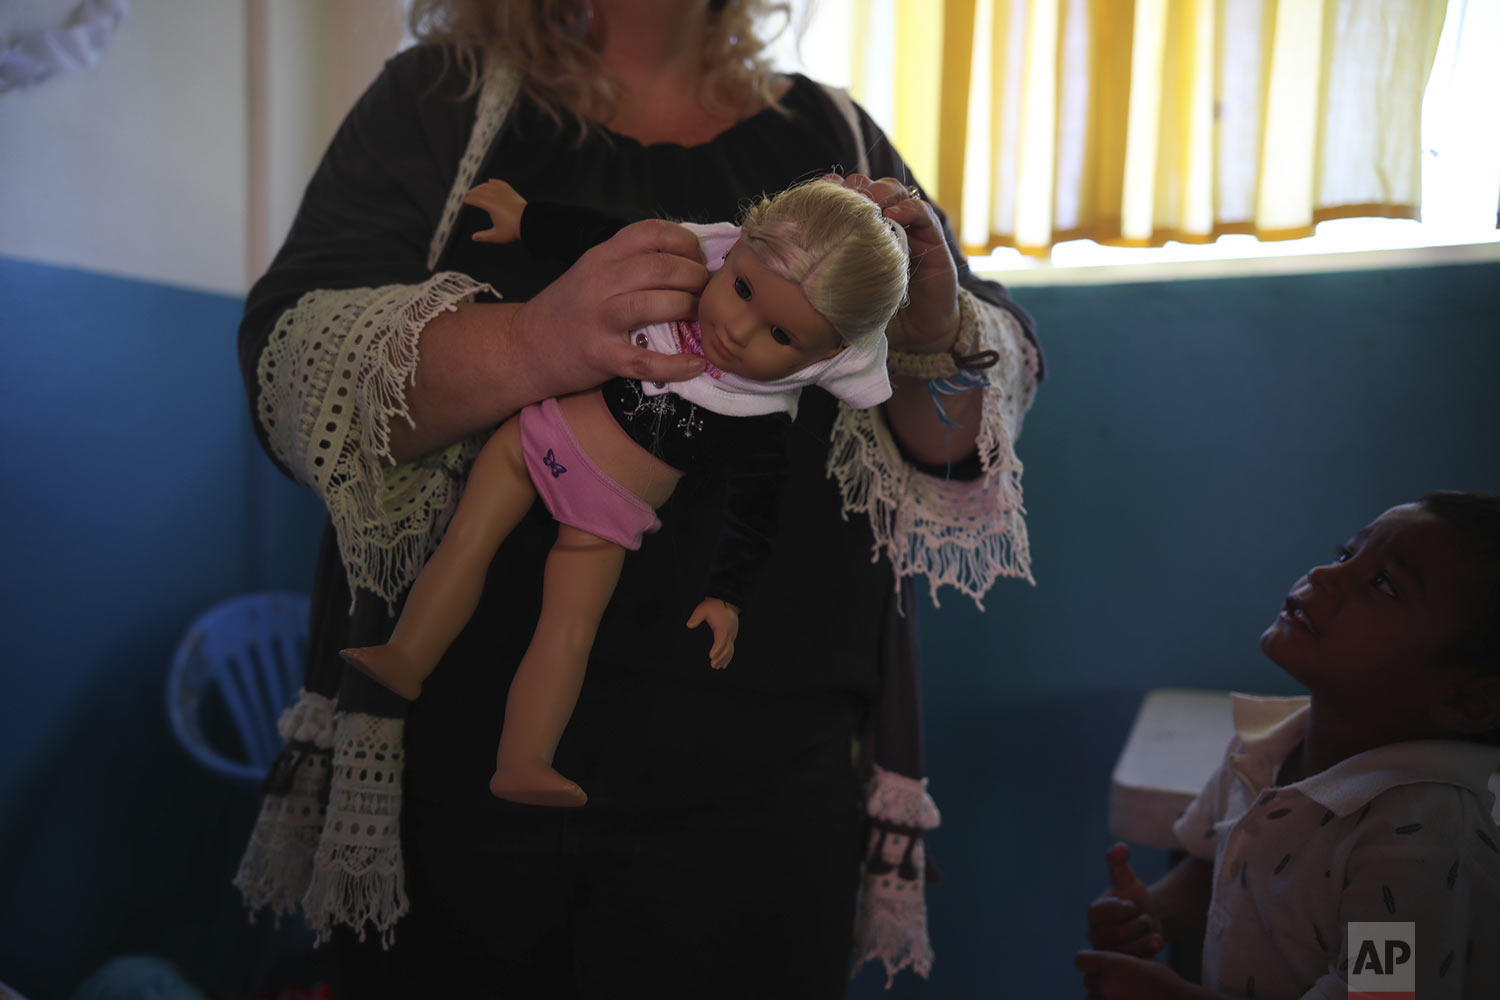  In this May 25, 2019 photo, Mindi Parish Stainer holds a doll during the baby shower for Salvadoran teen migrant Milagro de Jesus Henriquez Ayala, at a meeting hall in Tijuana, Mexico. Parish Stainer has been instrumental in getting the help the pre